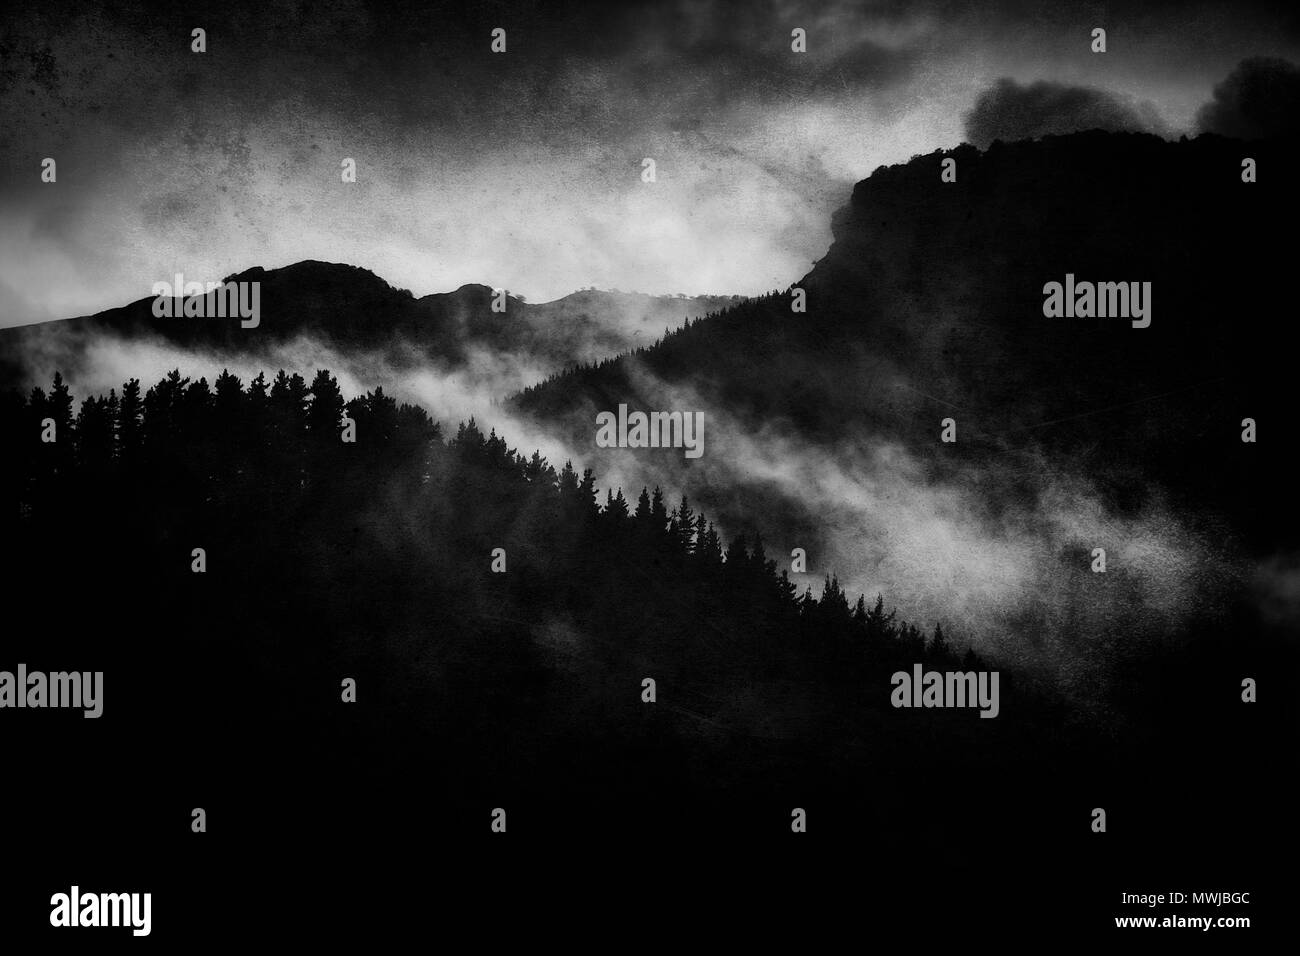 dark landscape with foggy forest at night and grungy textures. Black and white Stock Photo